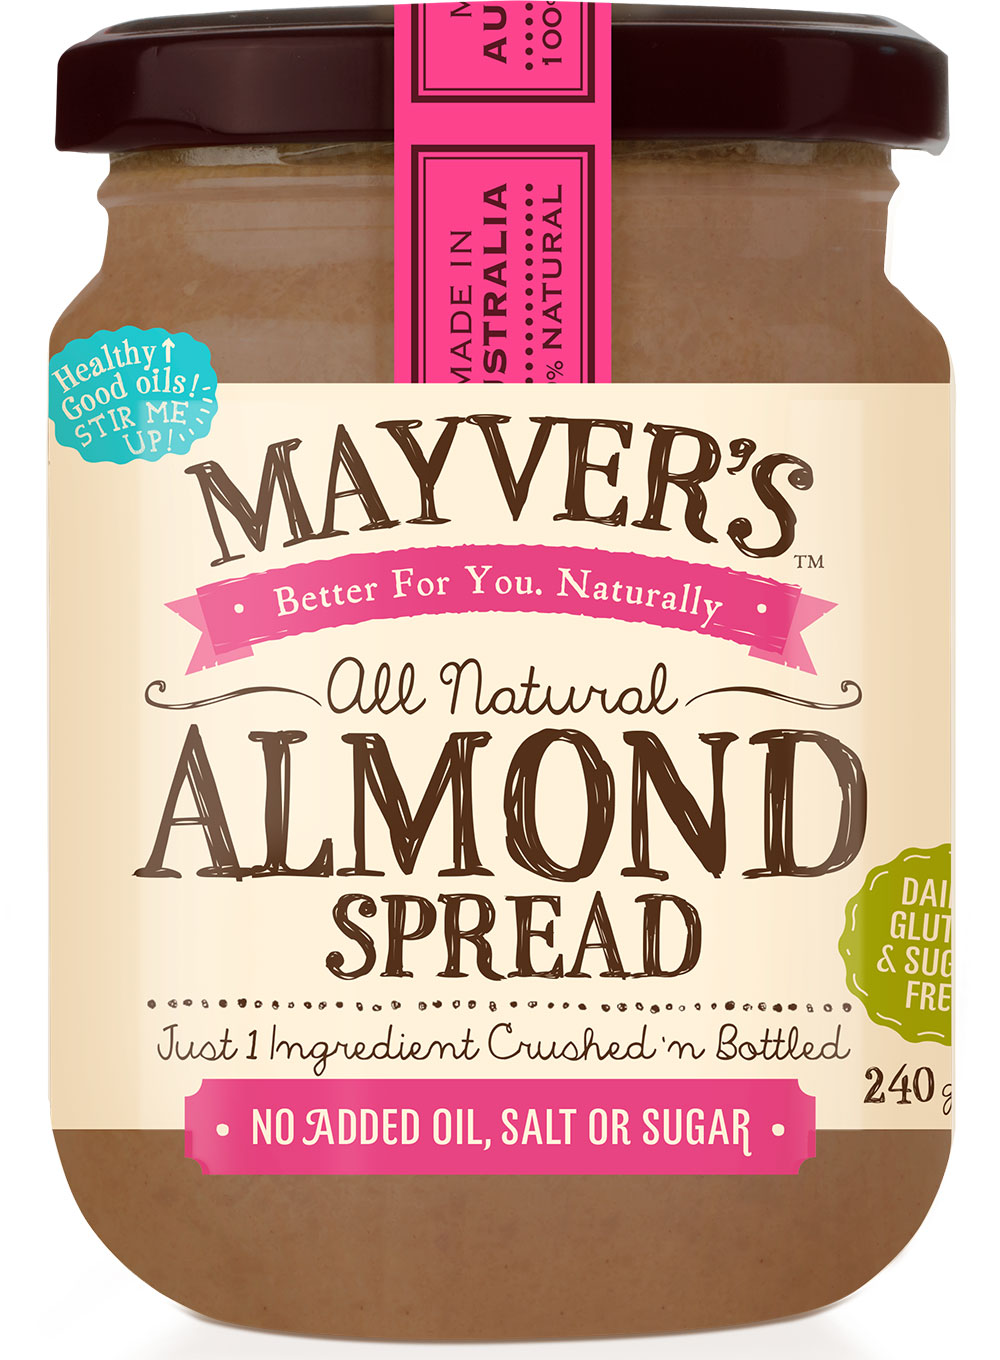 4025b_mayvers_almonds-spreads_almond-spread_hires